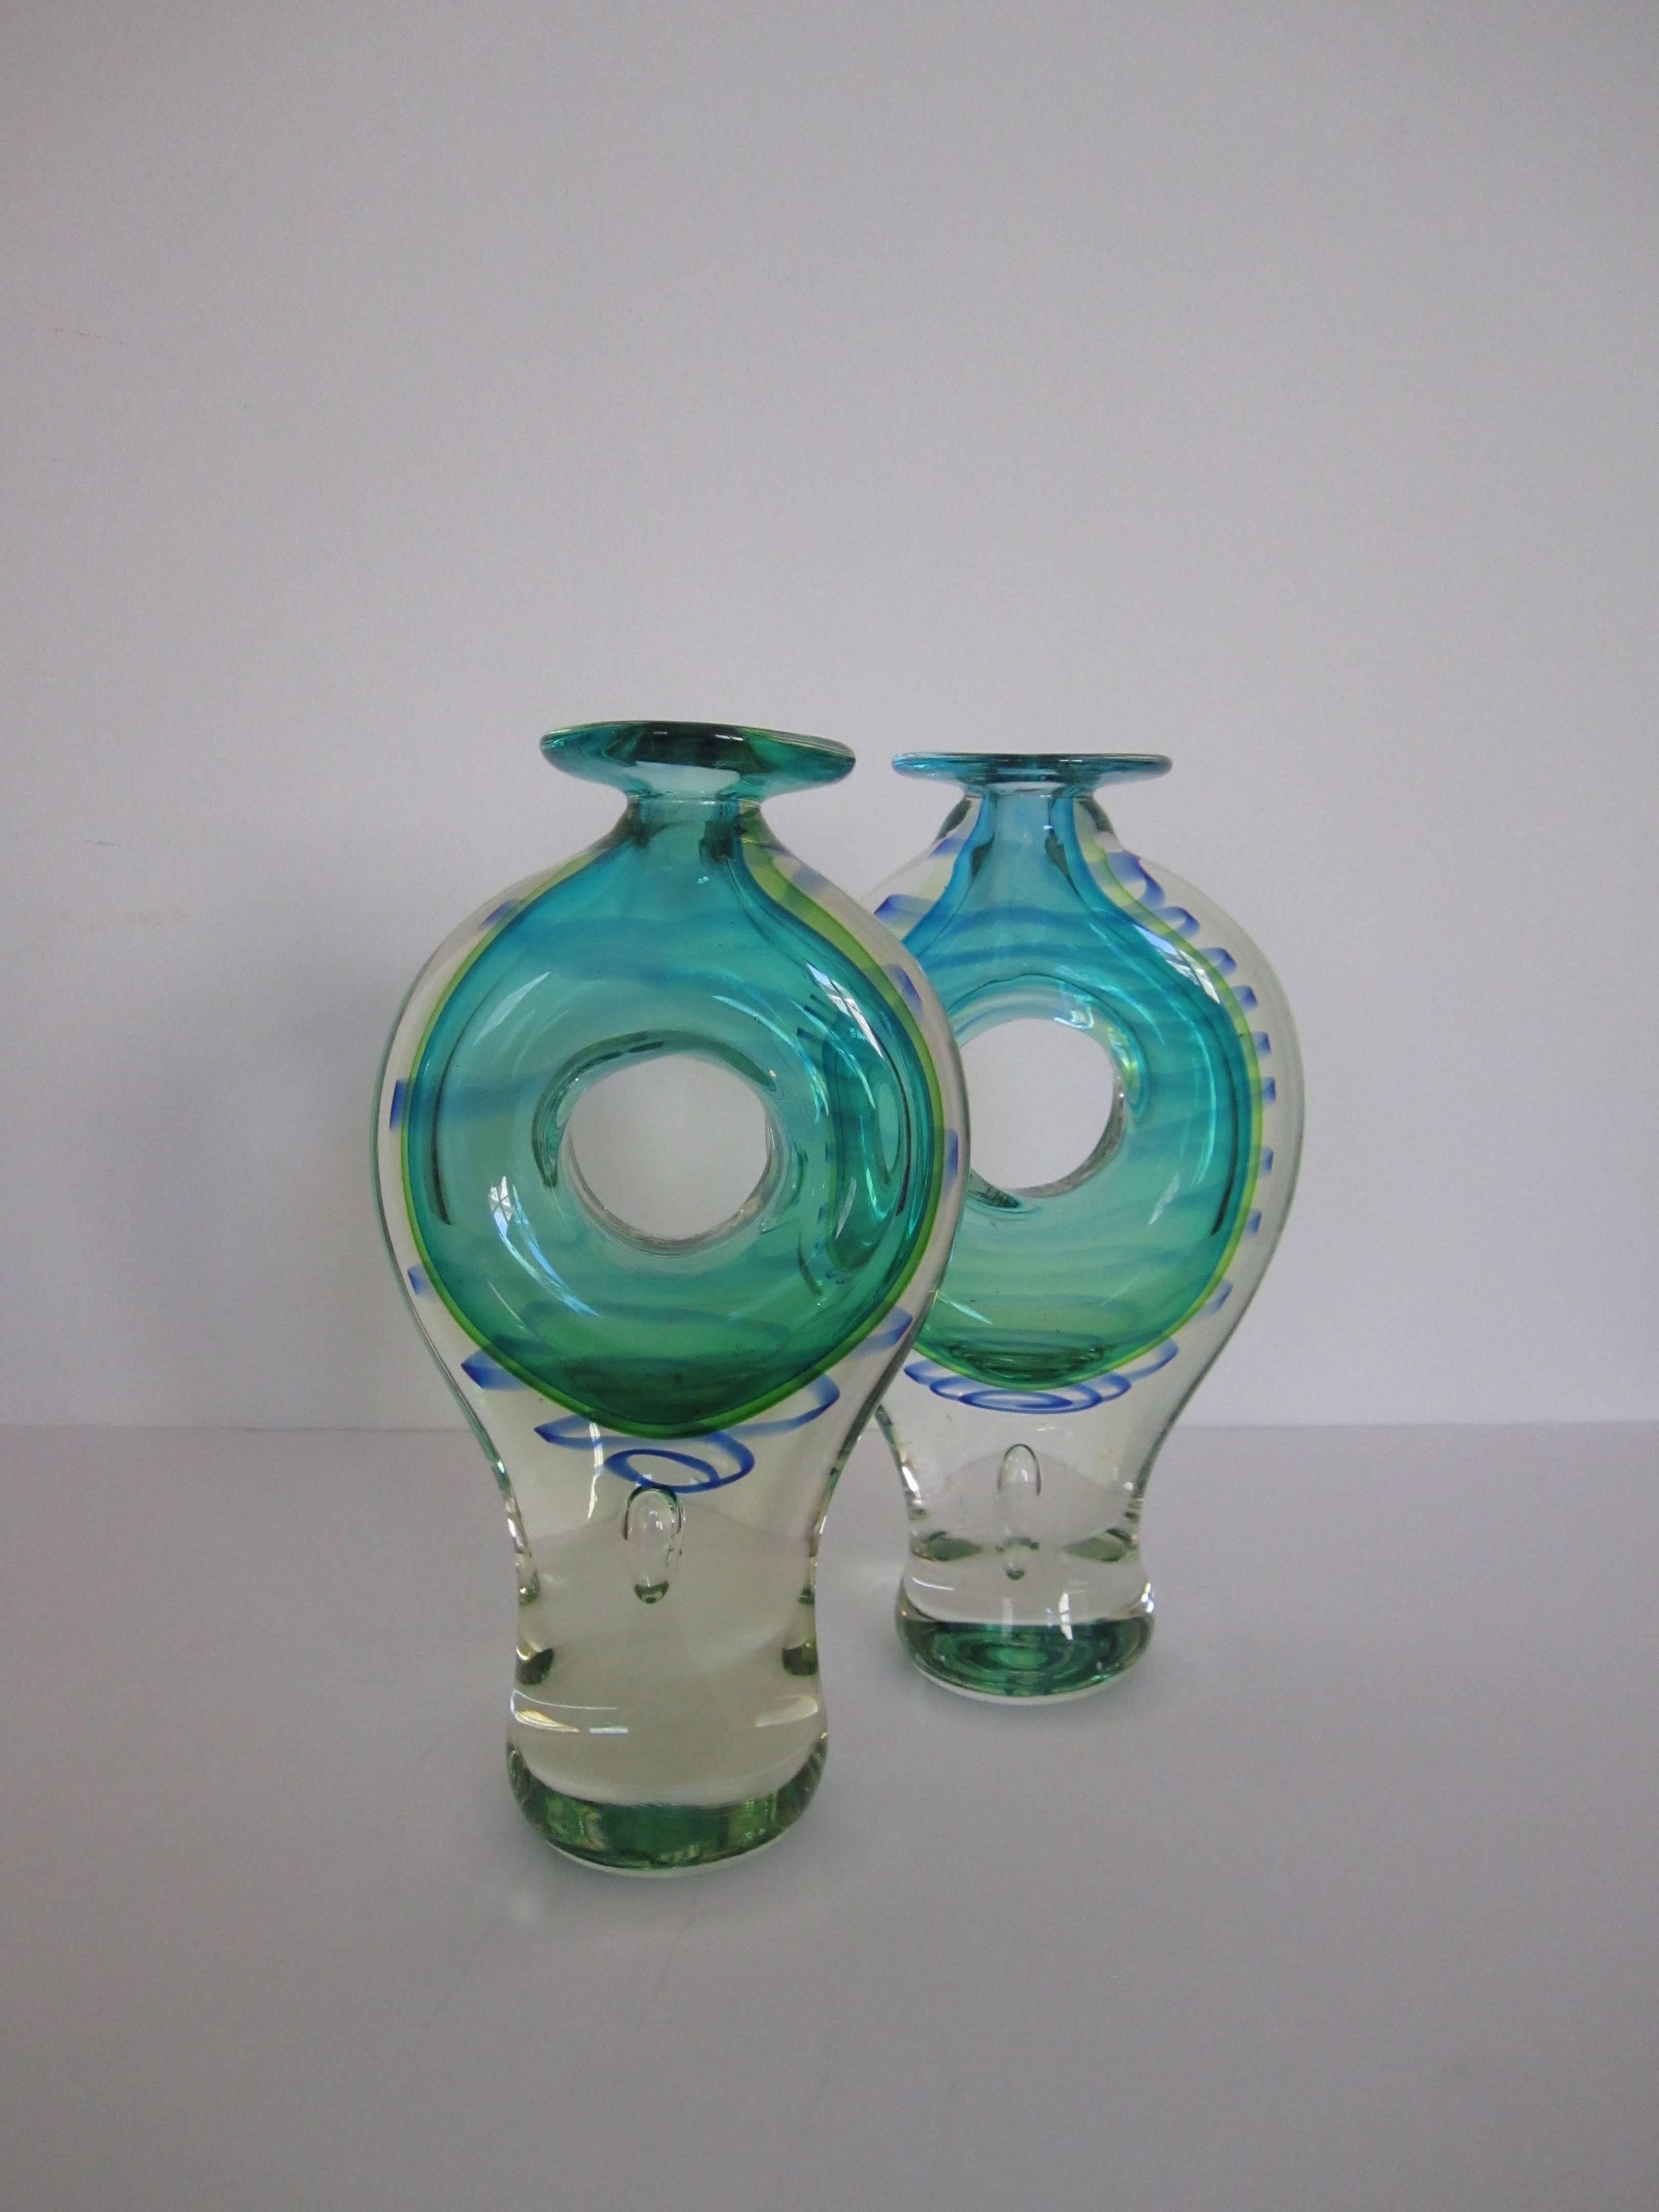 Pair of Modern Blue and Green Art Glass Vessels or Vases 2